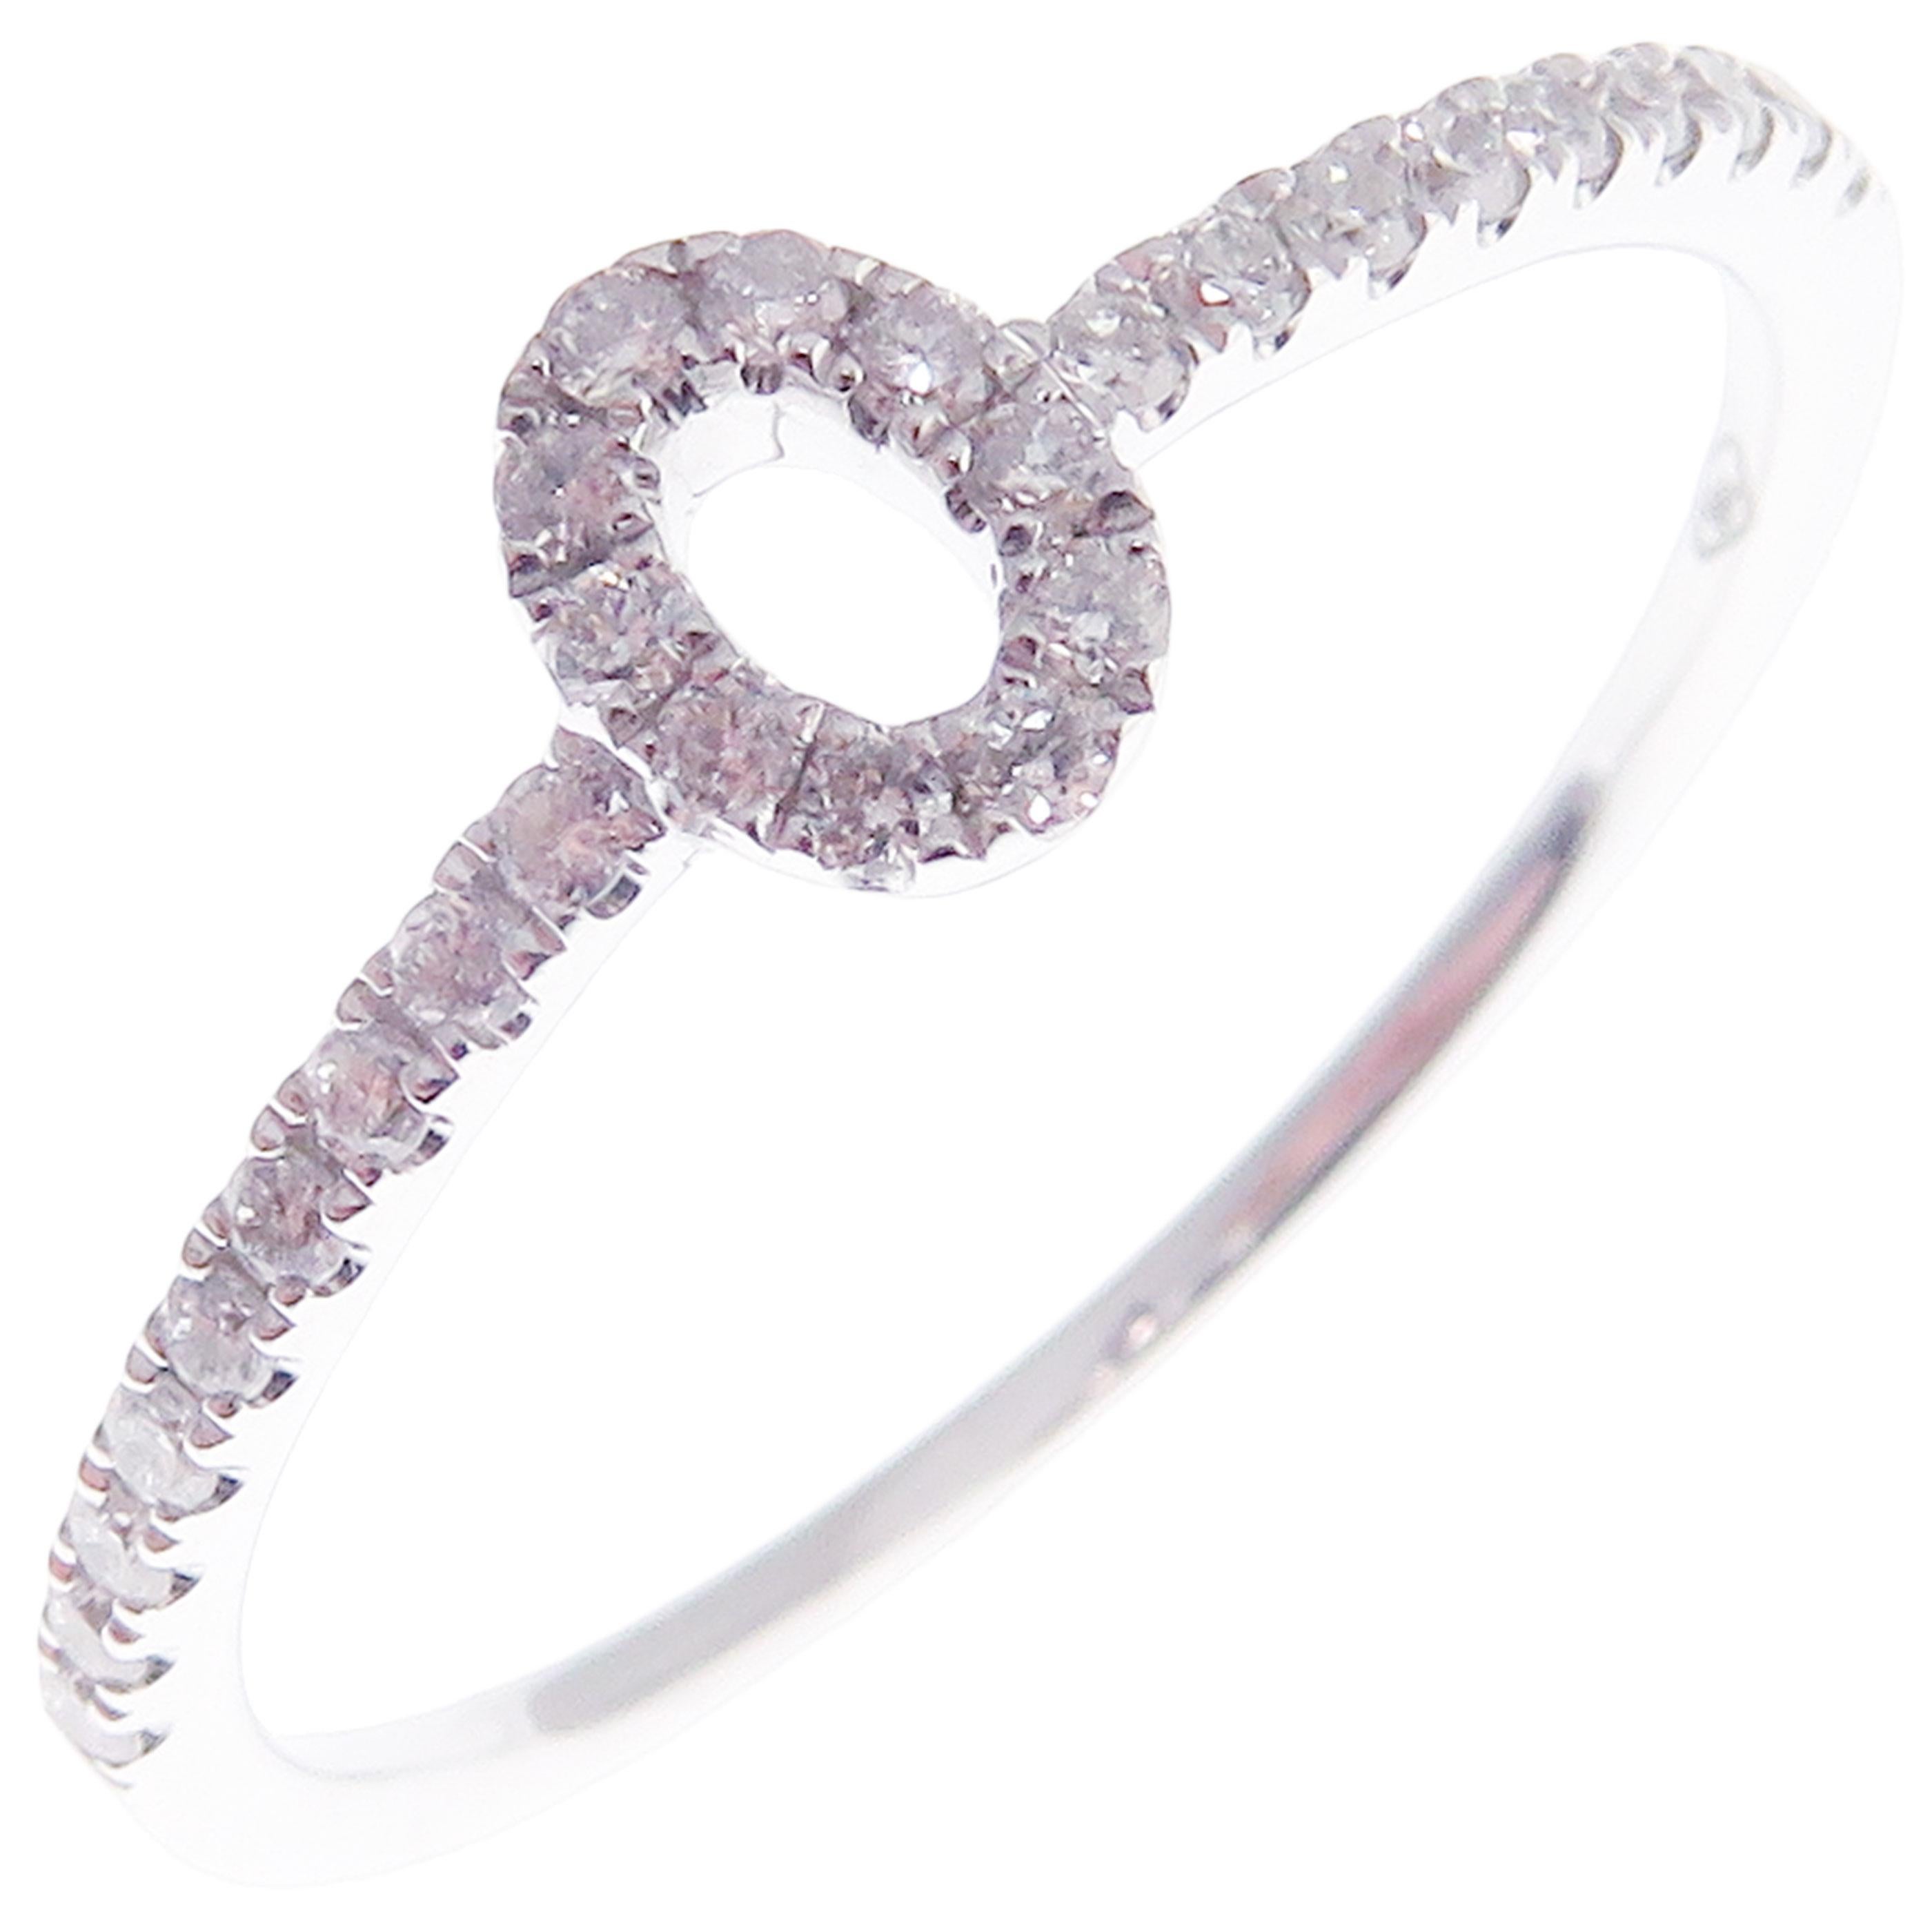 This trendy simple stackable ring is crafted in 18-karat white gold, featuring 28 round white diamonds totaling of 0.19 carats.
Approximate total weight 1.26 grams.
Standard Ring size 7
SI-G Quality natural white diamonds.